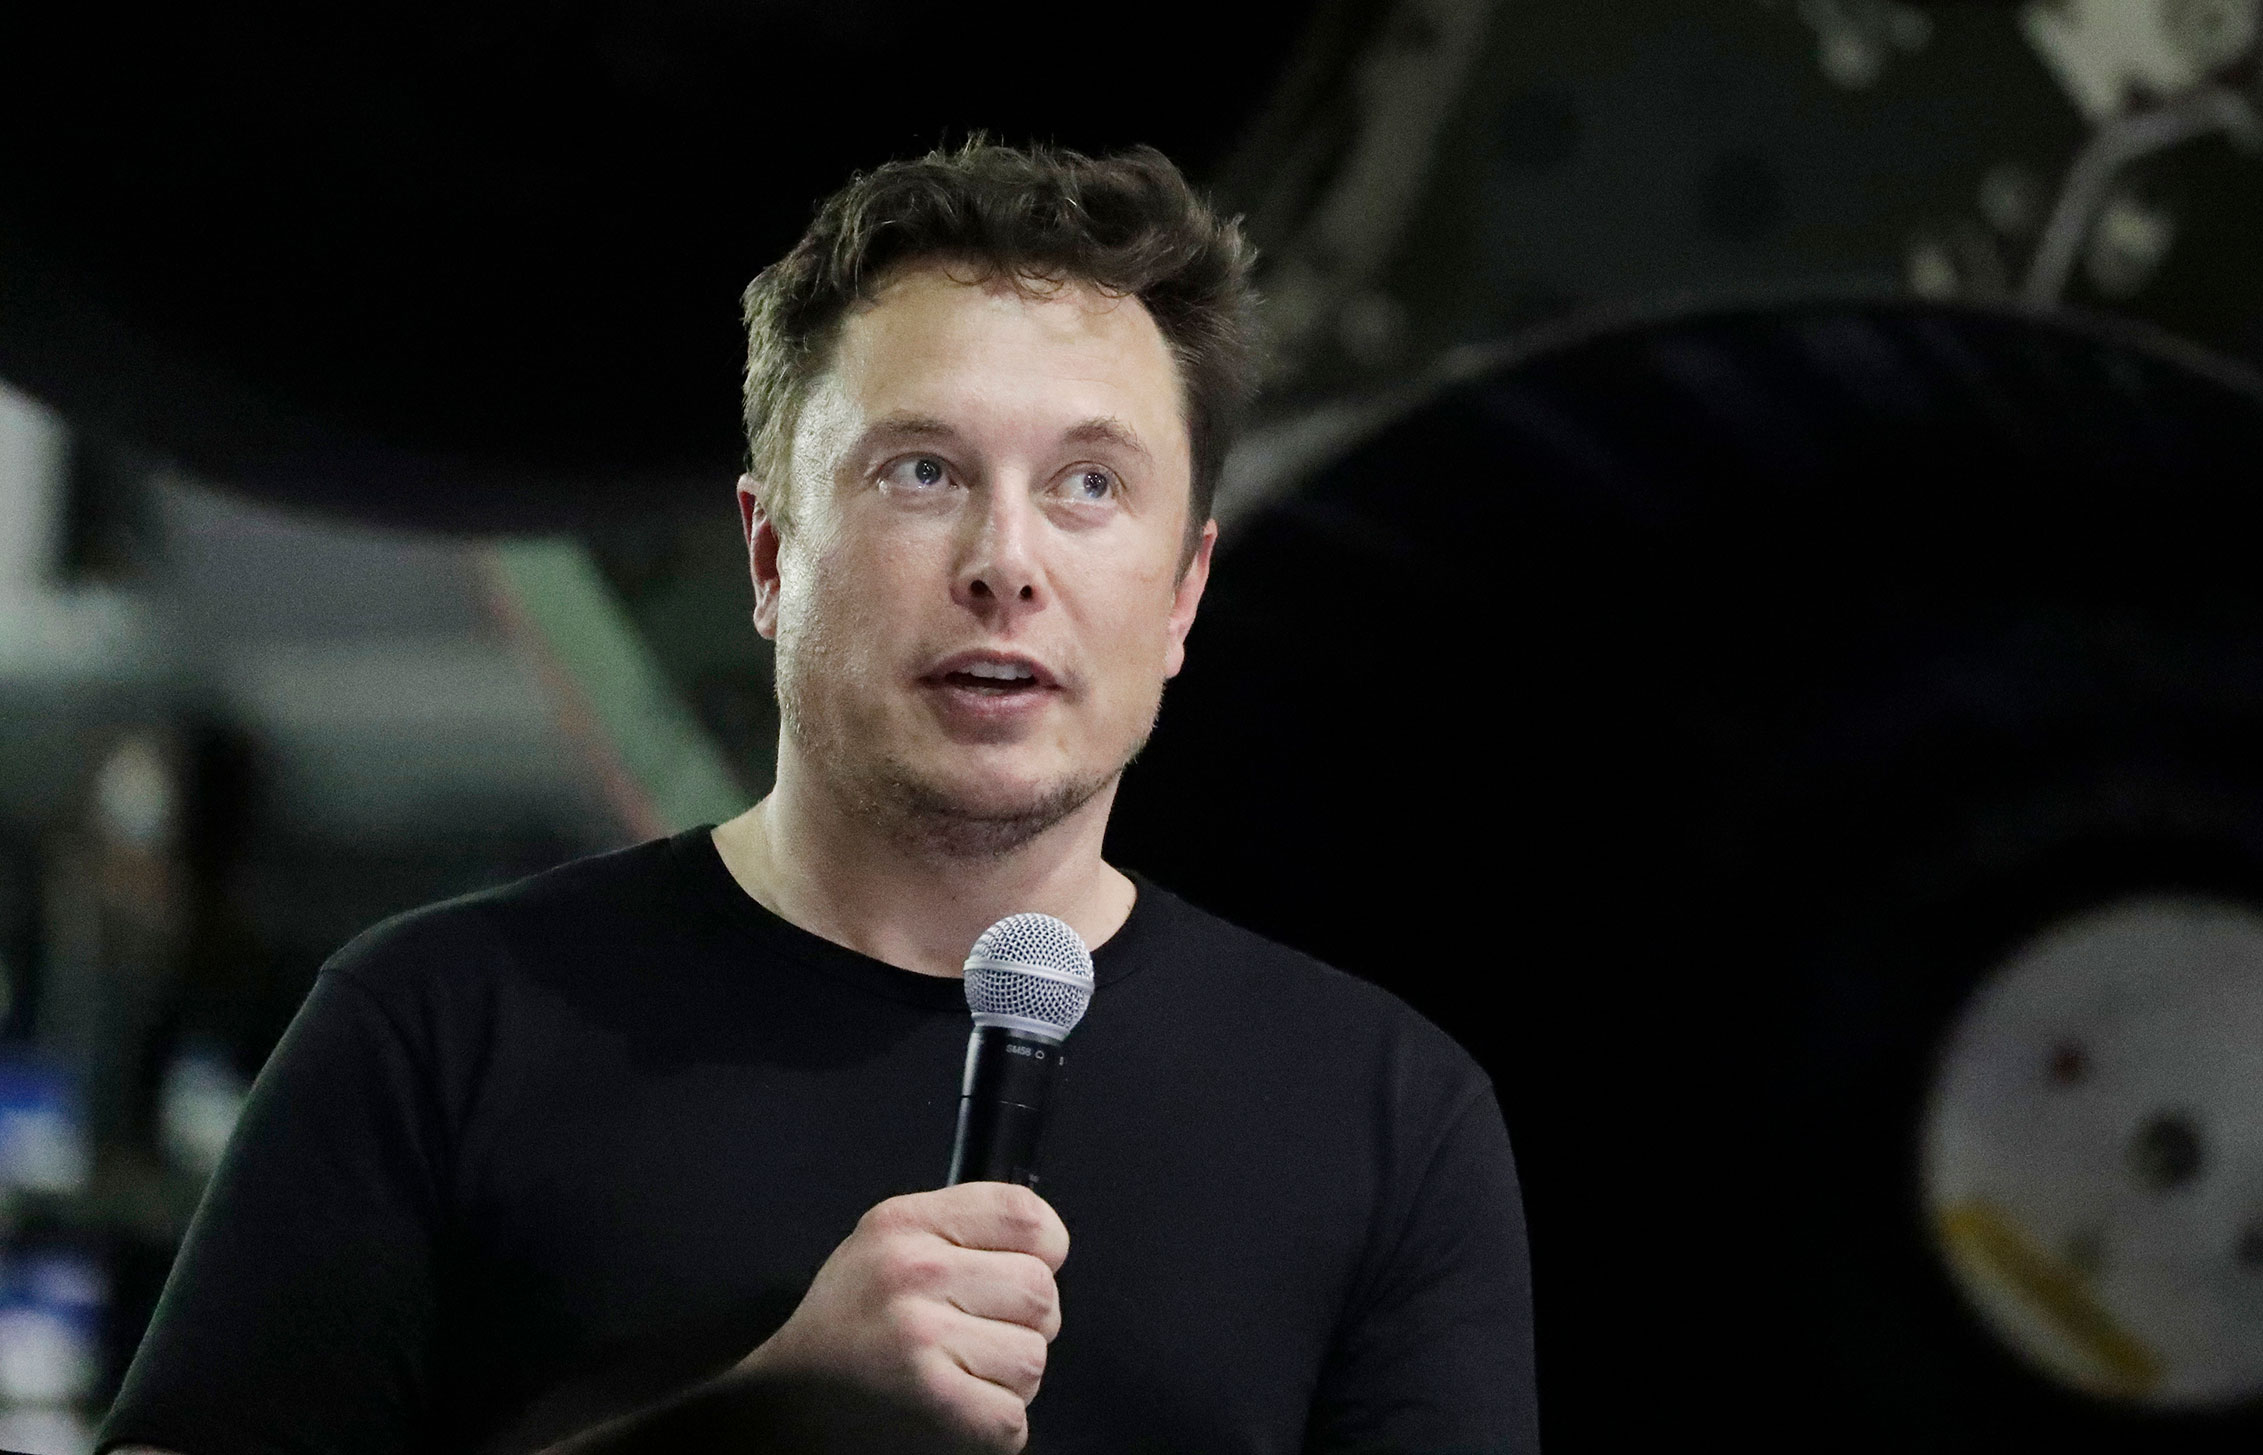 The SEC has asked a judge to hold Elon Musk in contempt for violating his settlement with the agency